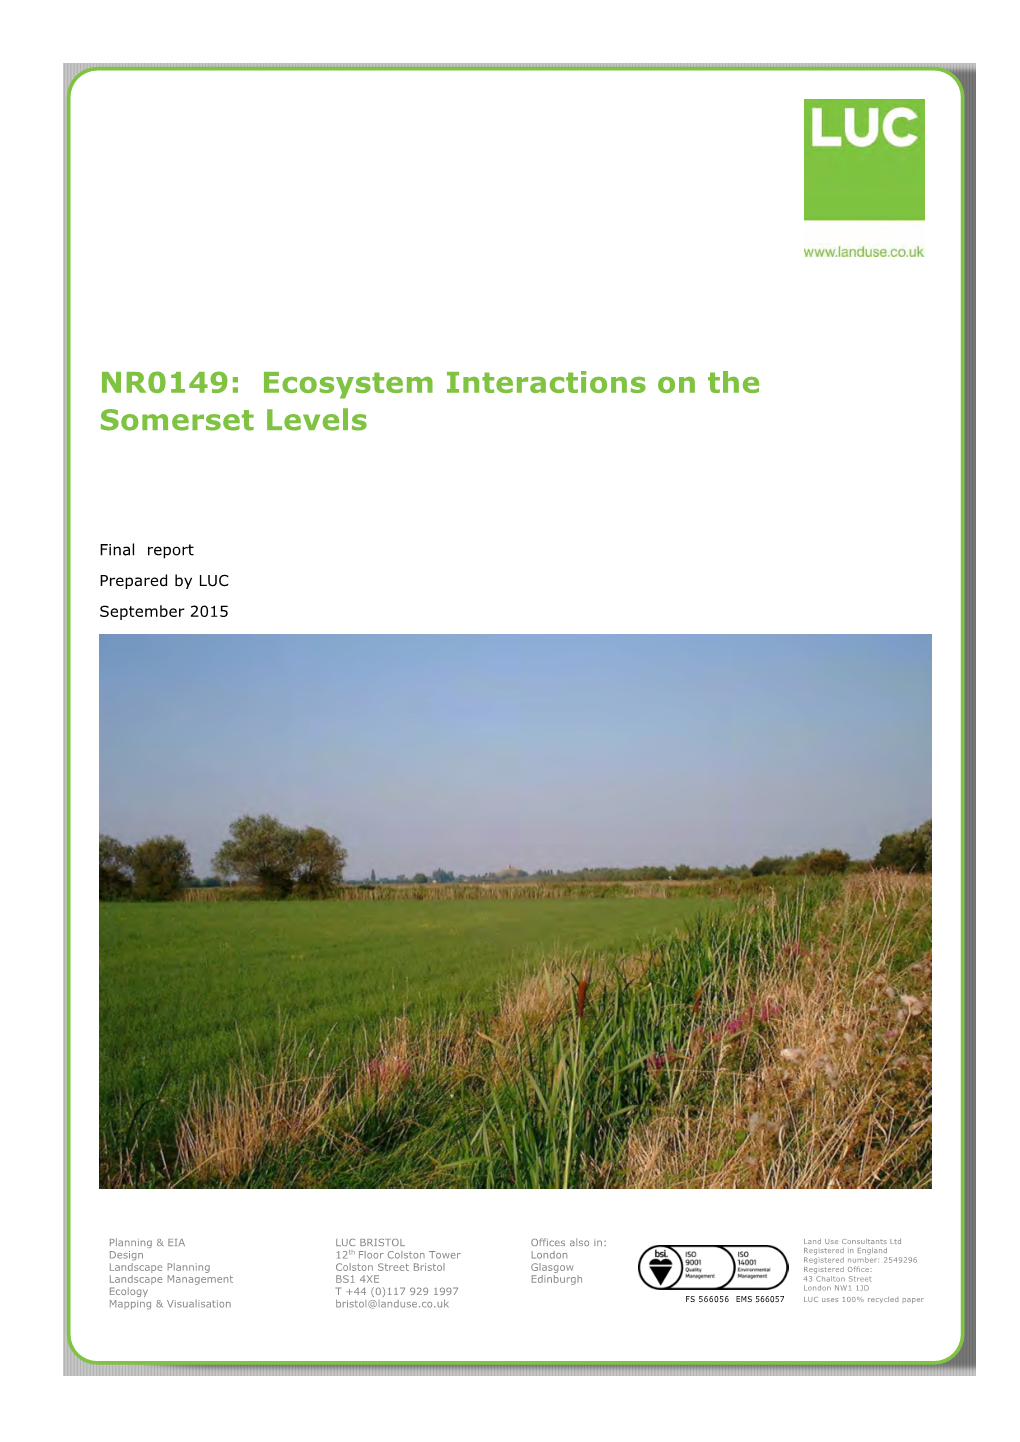 Ecosystem Interactions on the Somerset Levels